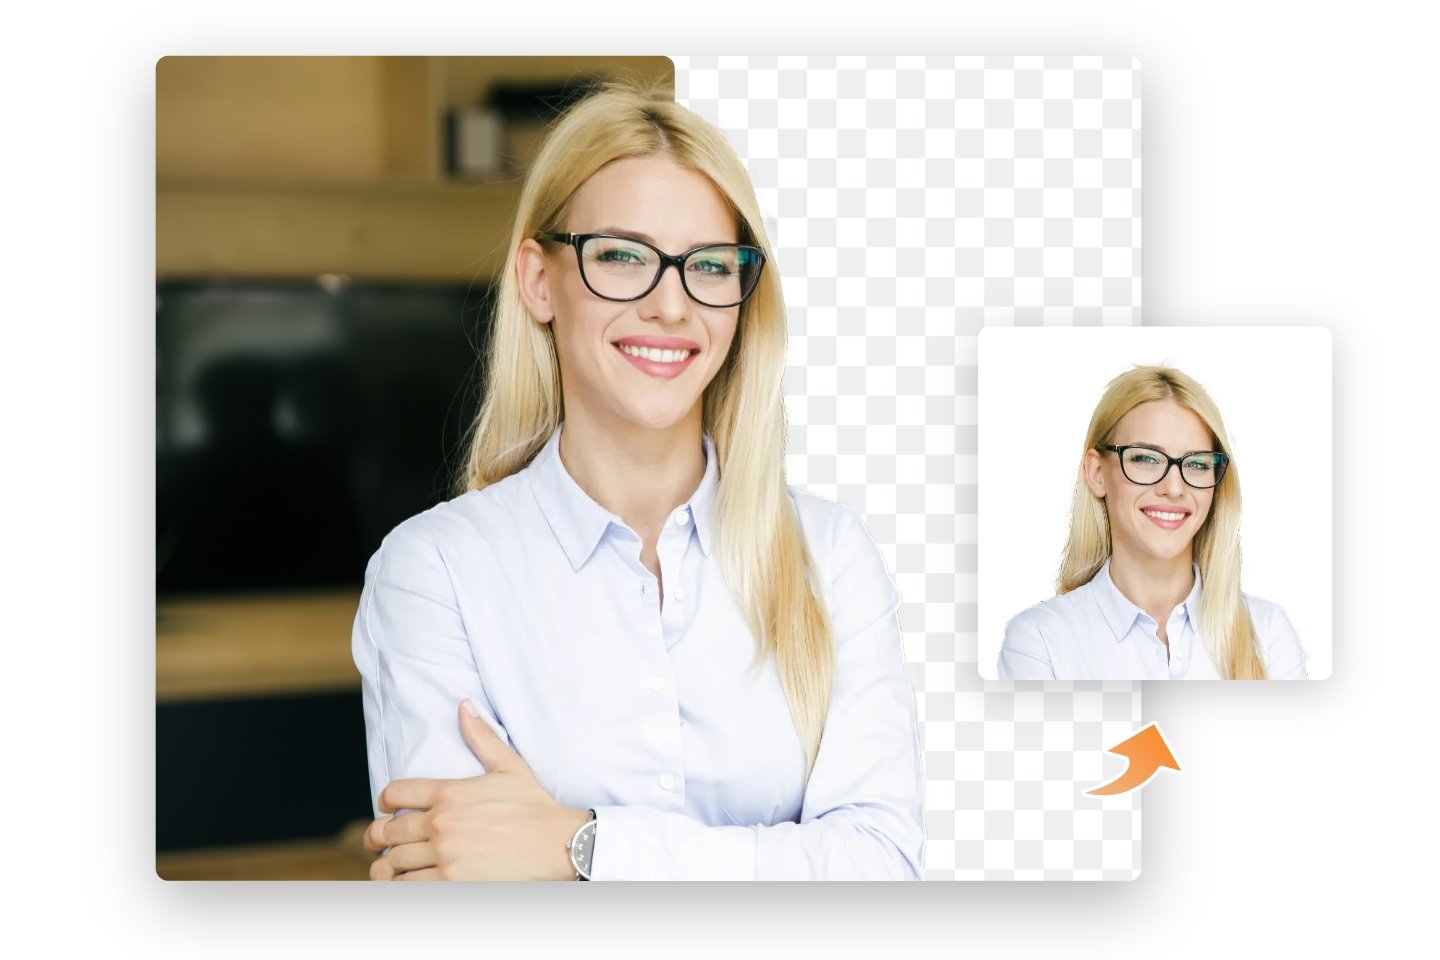 change an image background to white and convert it to a passport photo